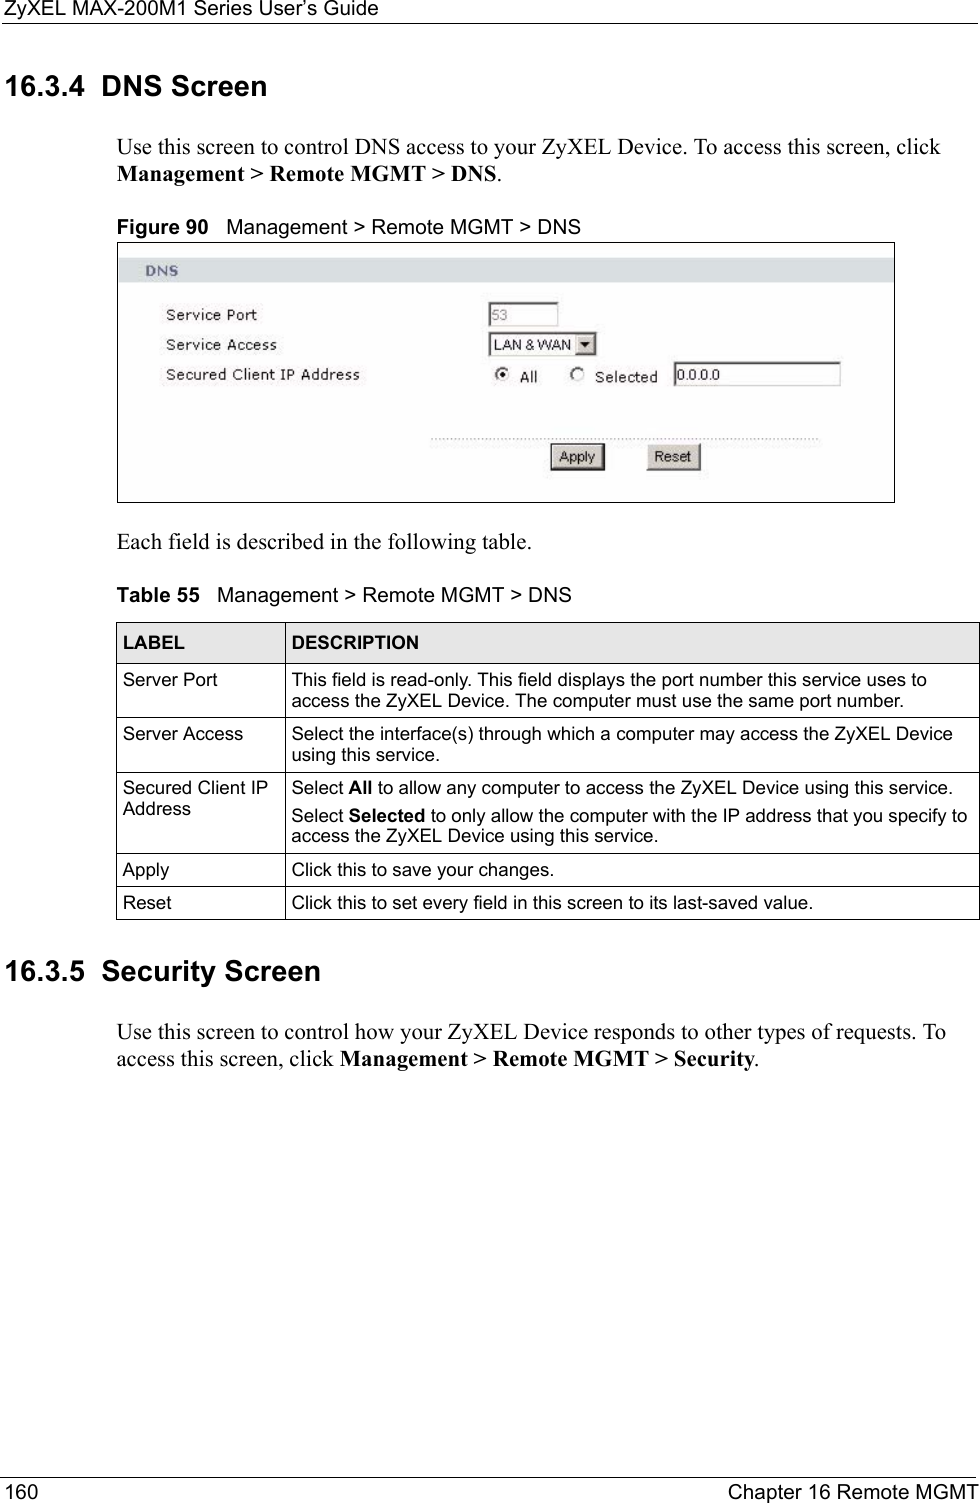 ZyXEL MAX-200M1 Series User’s Guide160 Chapter 16 Remote MGMT16.3.4  DNS ScreenUse this screen to control DNS access to your ZyXEL Device. To access this screen, click Management &gt; Remote MGMT &gt; DNS.Figure 90   Management &gt; Remote MGMT &gt; DNSEach field is described in the following table.16.3.5  Security ScreenUse this screen to control how your ZyXEL Device responds to other types of requests. To access this screen, click Management &gt; Remote MGMT &gt; Security.Table 55   Management &gt; Remote MGMT &gt; DNSLABEL DESCRIPTIONServer Port This field is read-only. This field displays the port number this service uses to access the ZyXEL Device. The computer must use the same port number.Server Access Select the interface(s) through which a computer may access the ZyXEL Device using this service.Secured Client IP AddressSelect All to allow any computer to access the ZyXEL Device using this service.Select Selected to only allow the computer with the IP address that you specify to access the ZyXEL Device using this service.Apply Click this to save your changes.Reset Click this to set every field in this screen to its last-saved value.